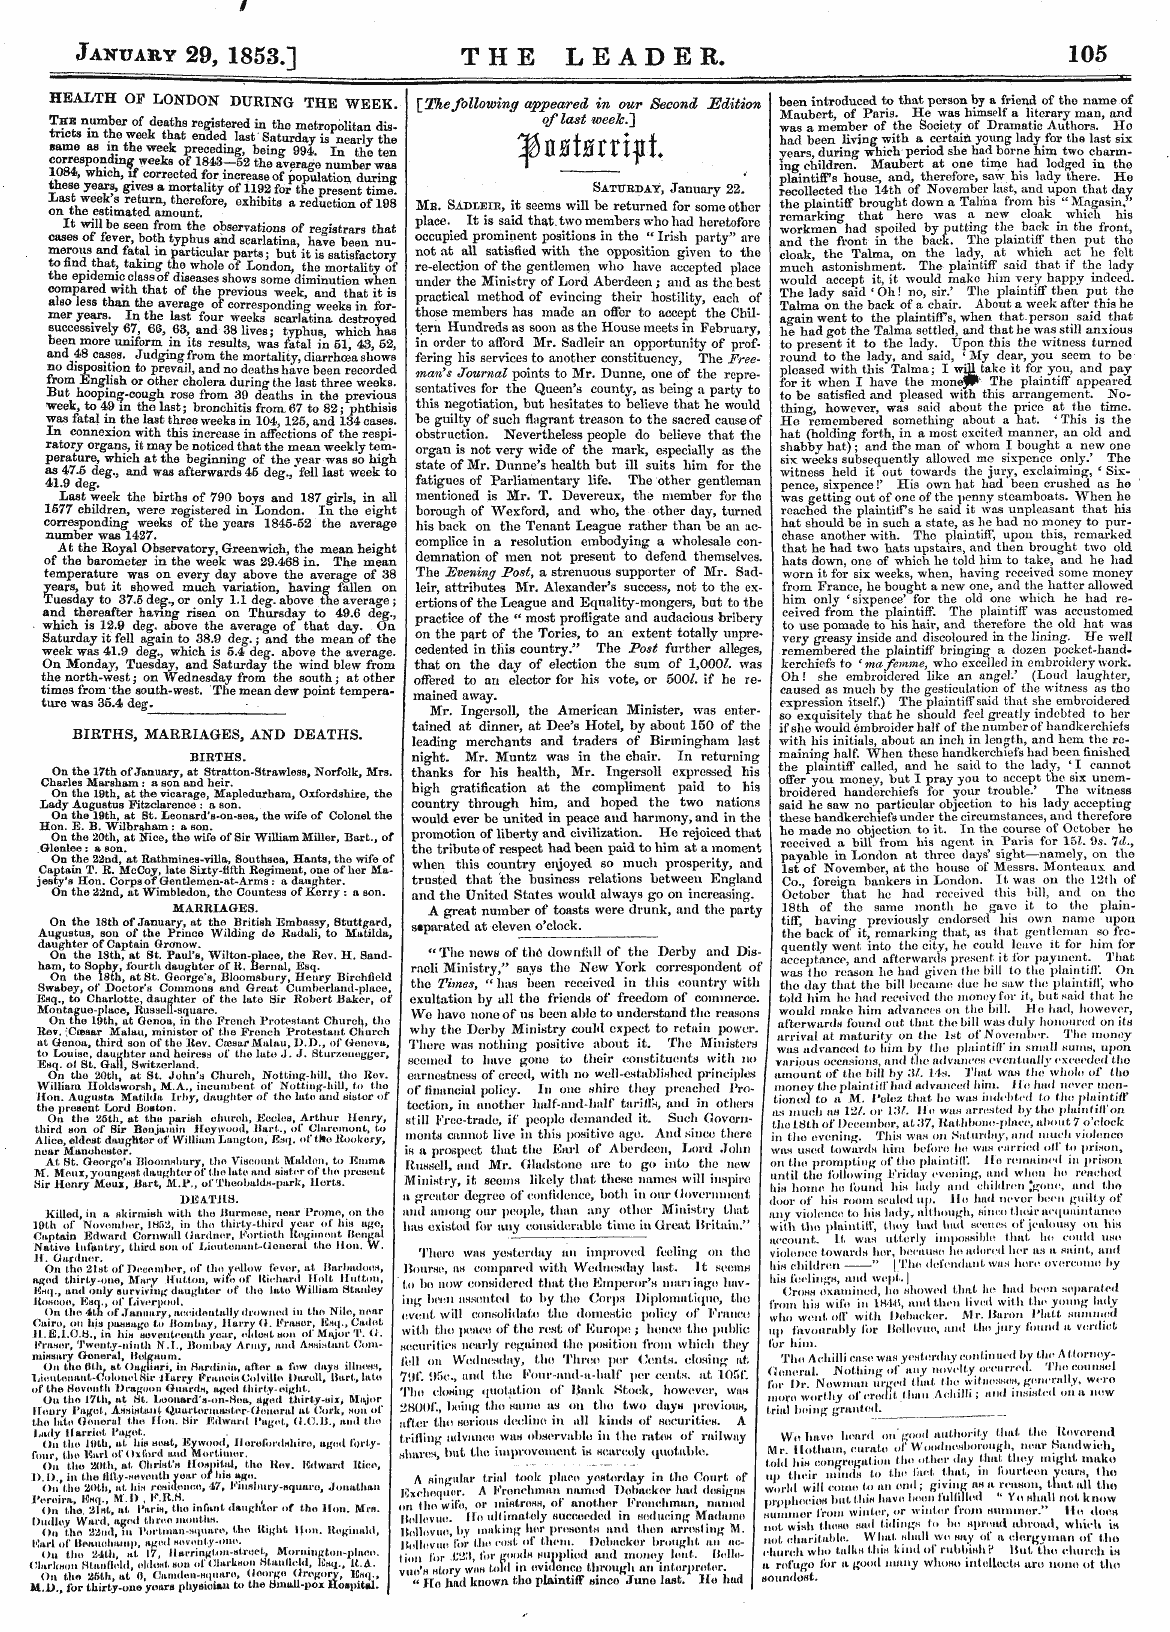 Leader (1850-1860): jS F Y, Country edition - " The News Of The Downfall Of The Derby ...